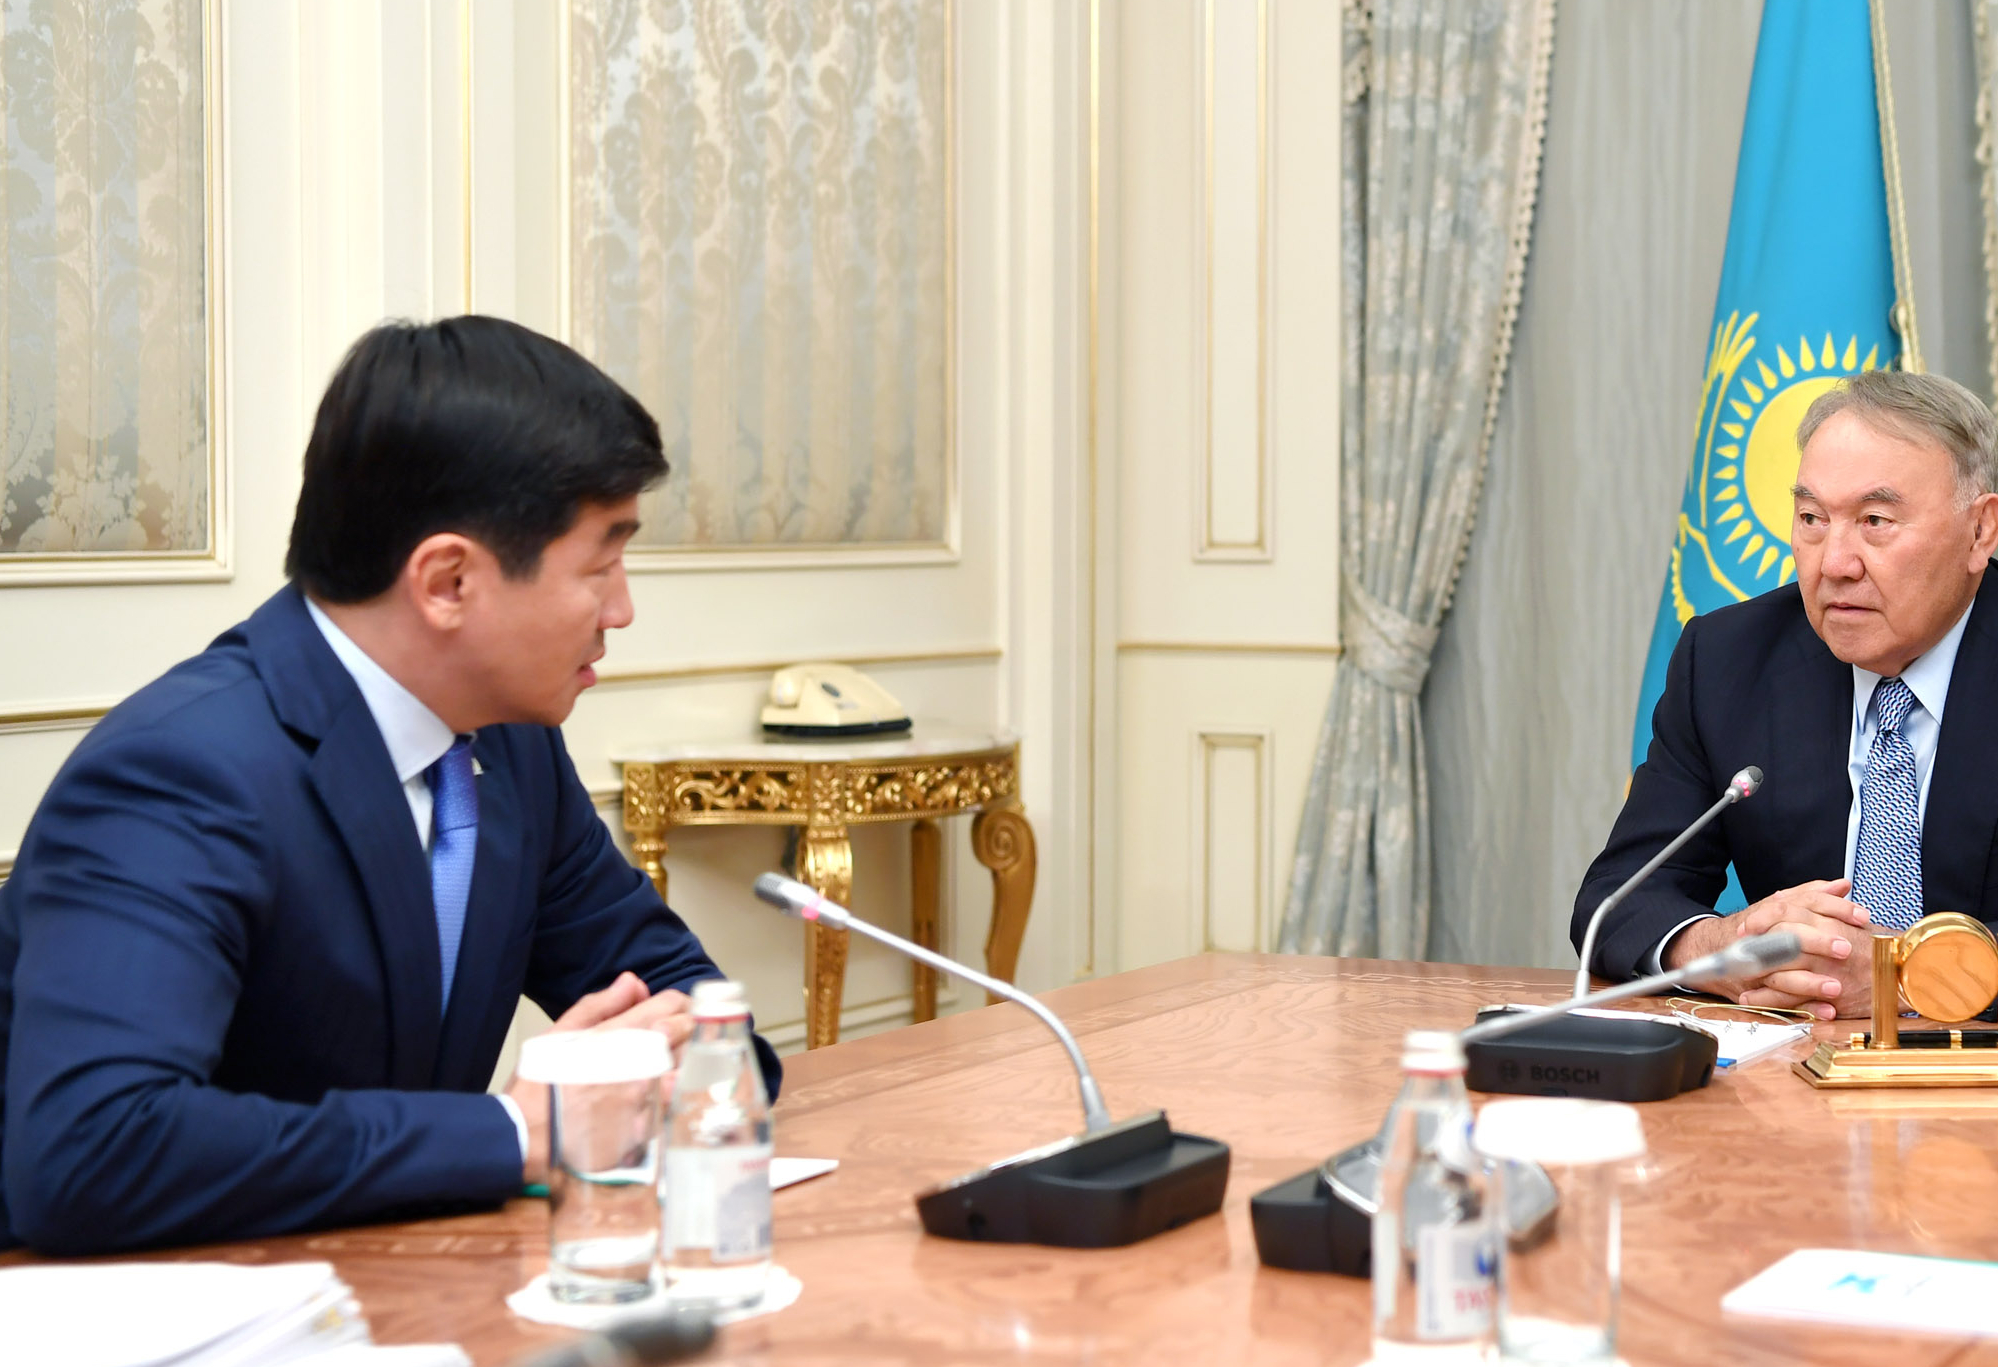 Nazarbayev receives the First Deputy Chairman of the Nur Otan party